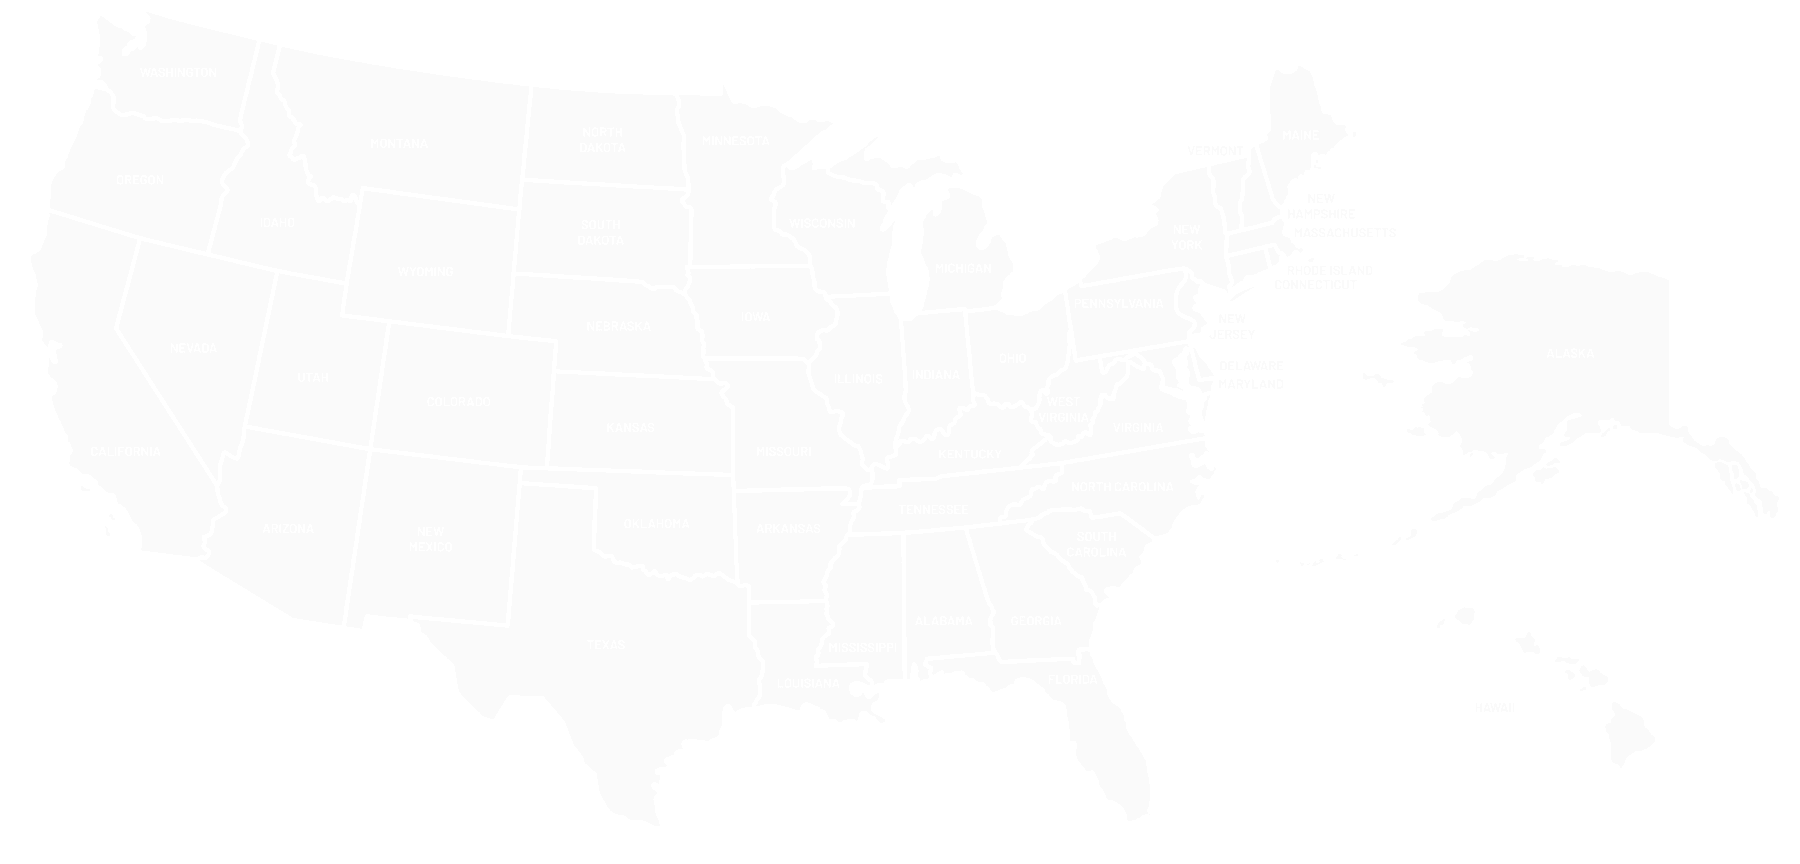 Find Loans Near Me by State